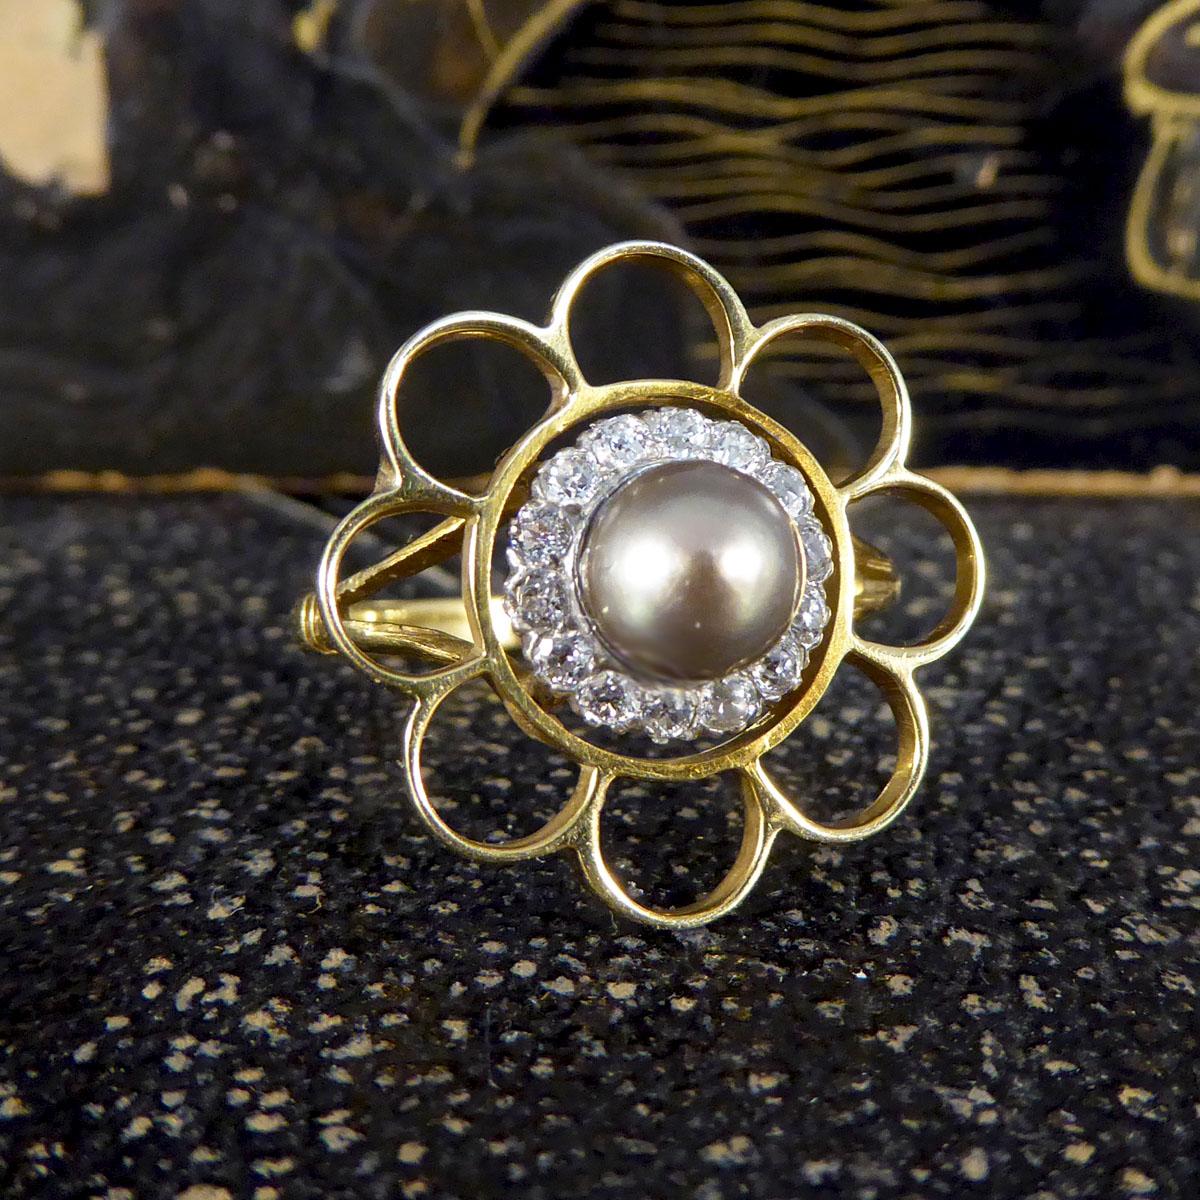 This ring features a lustrous grey Pearl in the centre with a surround of approx 0.40ct Old European Cut Diamonds from the Edwardian era which looks to have been converted from a pin to a ring. Around the antique cluster sits a flower surround